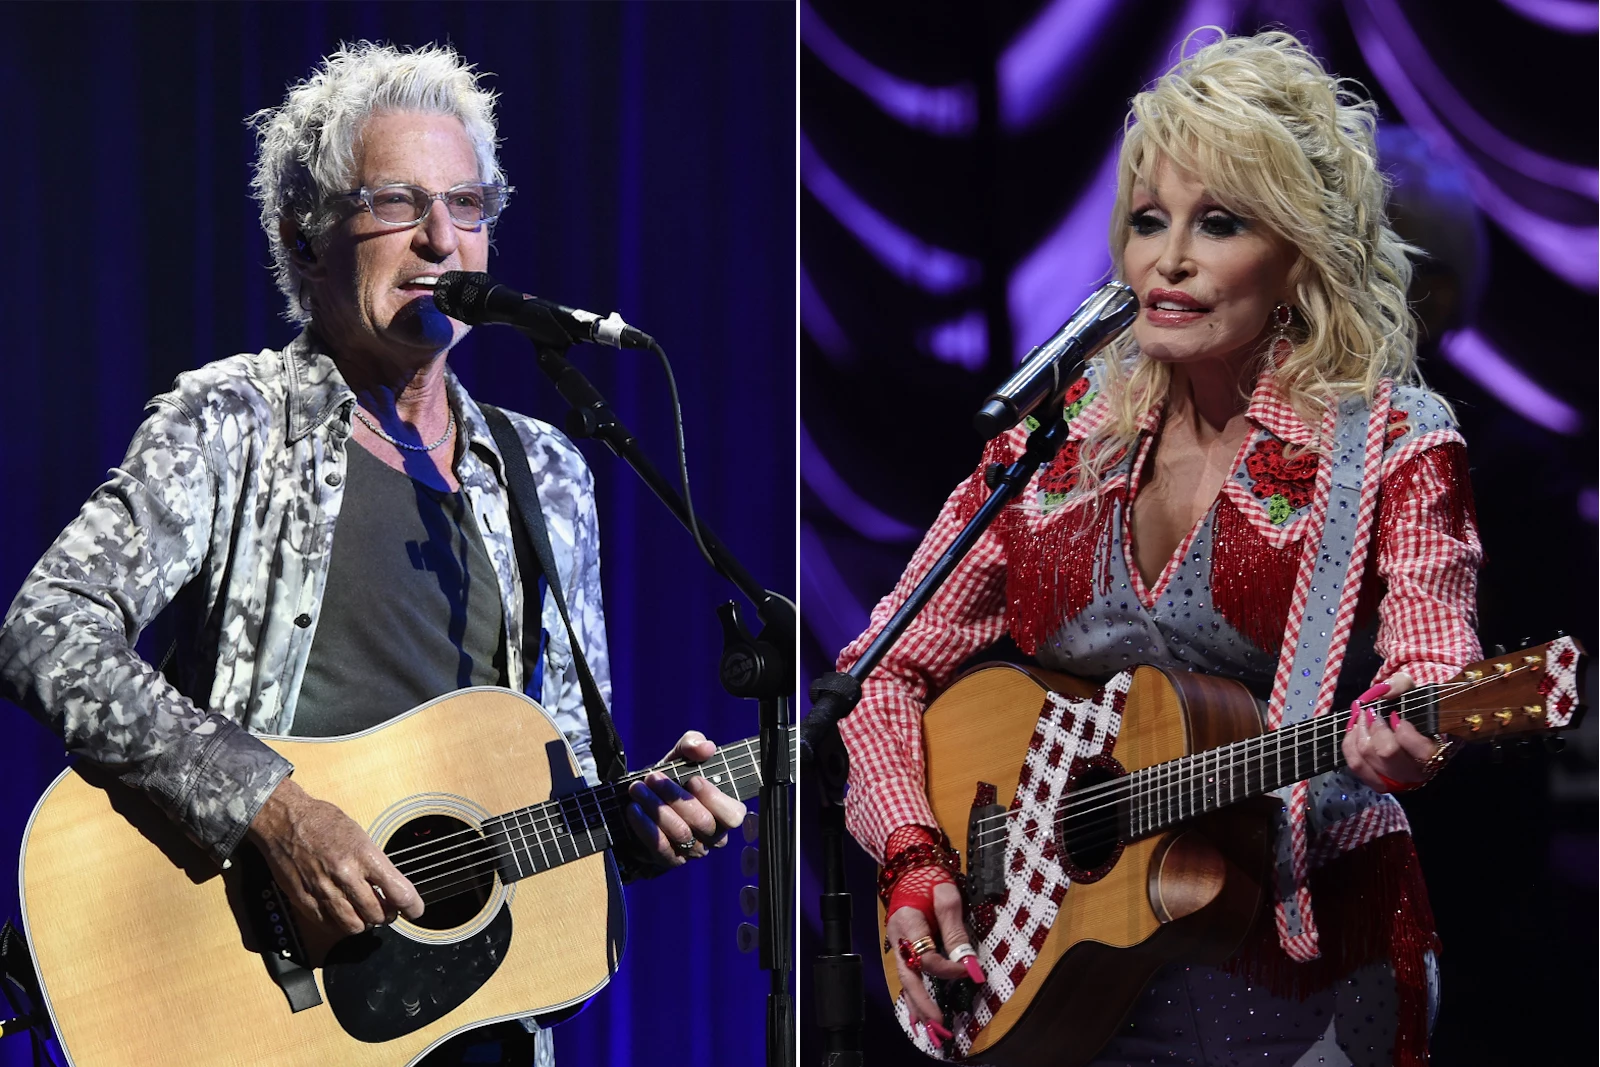 Kevin Cronin and Dolly Parton Re-Imagine ‘Keep on Loving You’